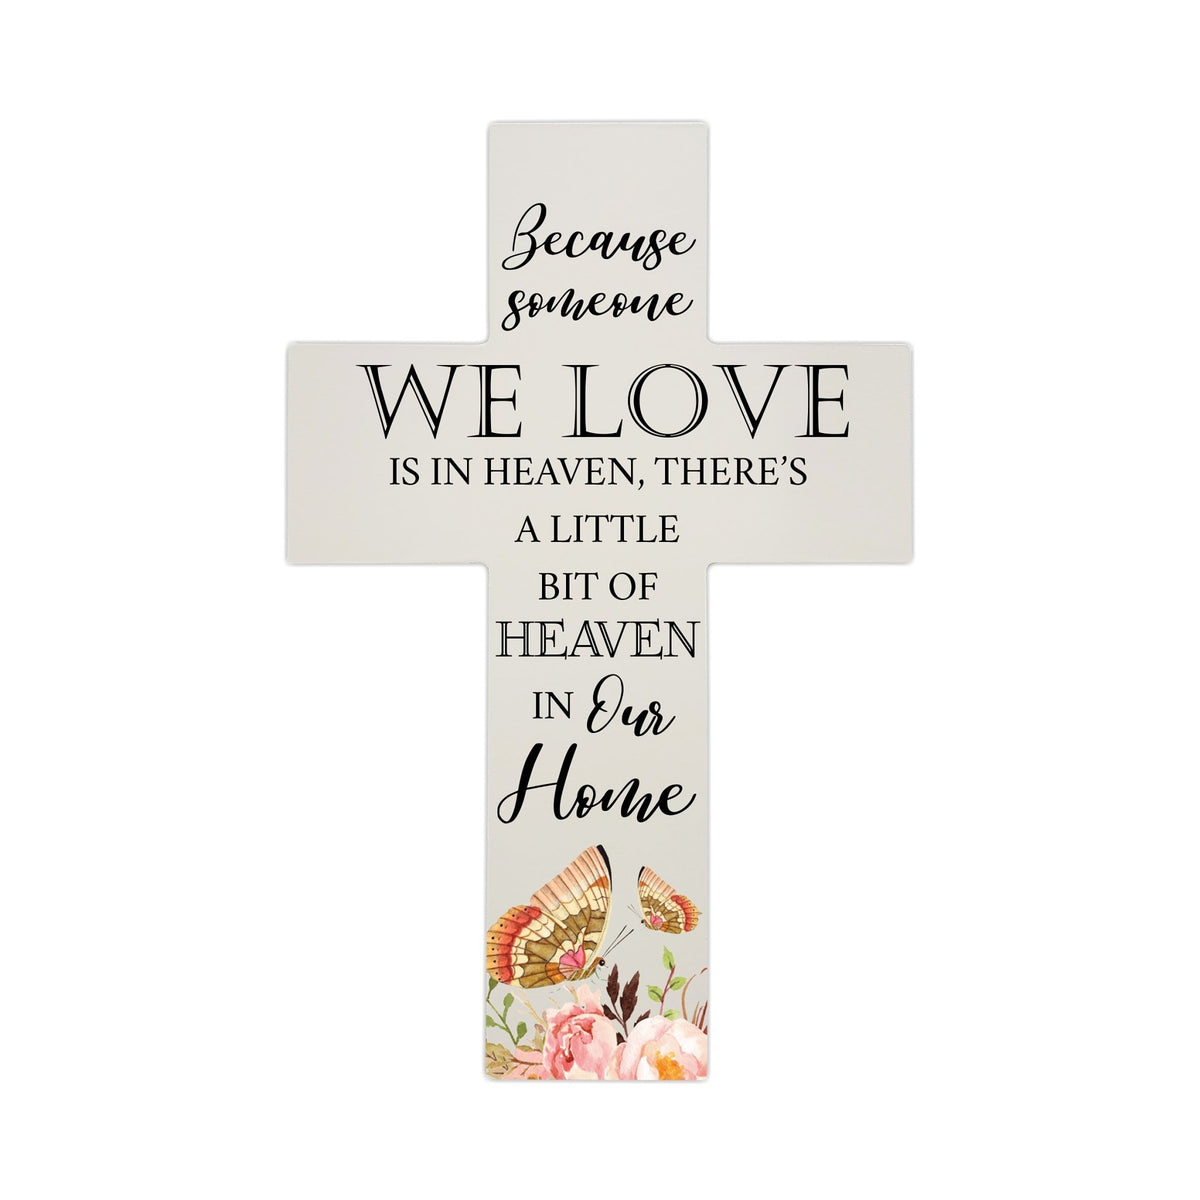 Butterfly Memorial Wall Cross For Loss of Loved One Because Someone We Love is in Heaven Quote Bereavement Keepsake 14 x 9.25 Because Someone We Love is in Heaven, There&#39;s A Little Bit Of Heaven In Our Home - LifeSong Milestones